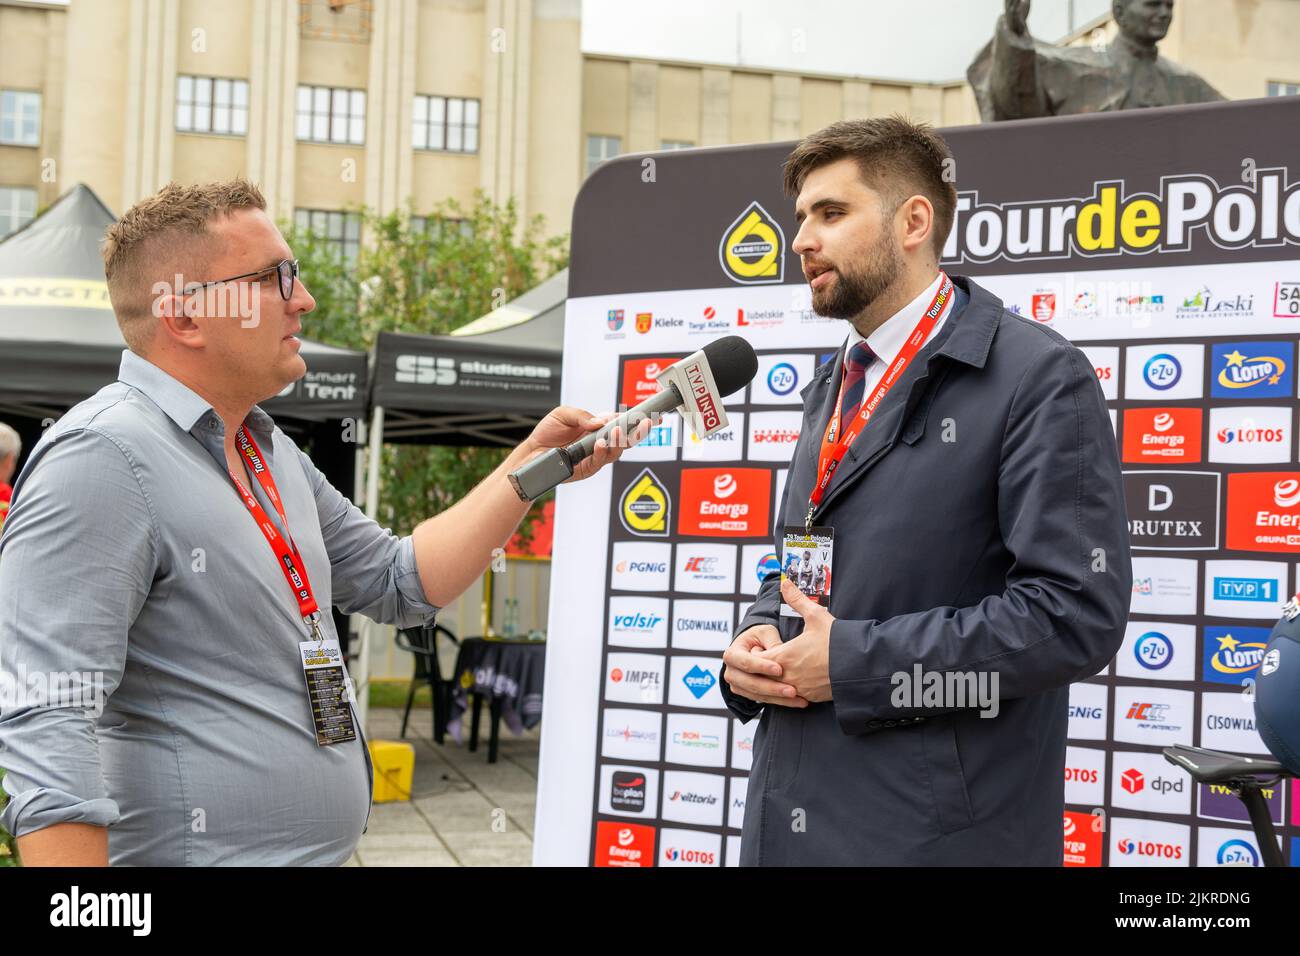 Chelm, Lubelskie, Poland - July 31, 2022: 79 tour de Pologne, The mayor of the city of Chełm, Jakub Banaszek gives an interview to the TVP info statio Stock Photo